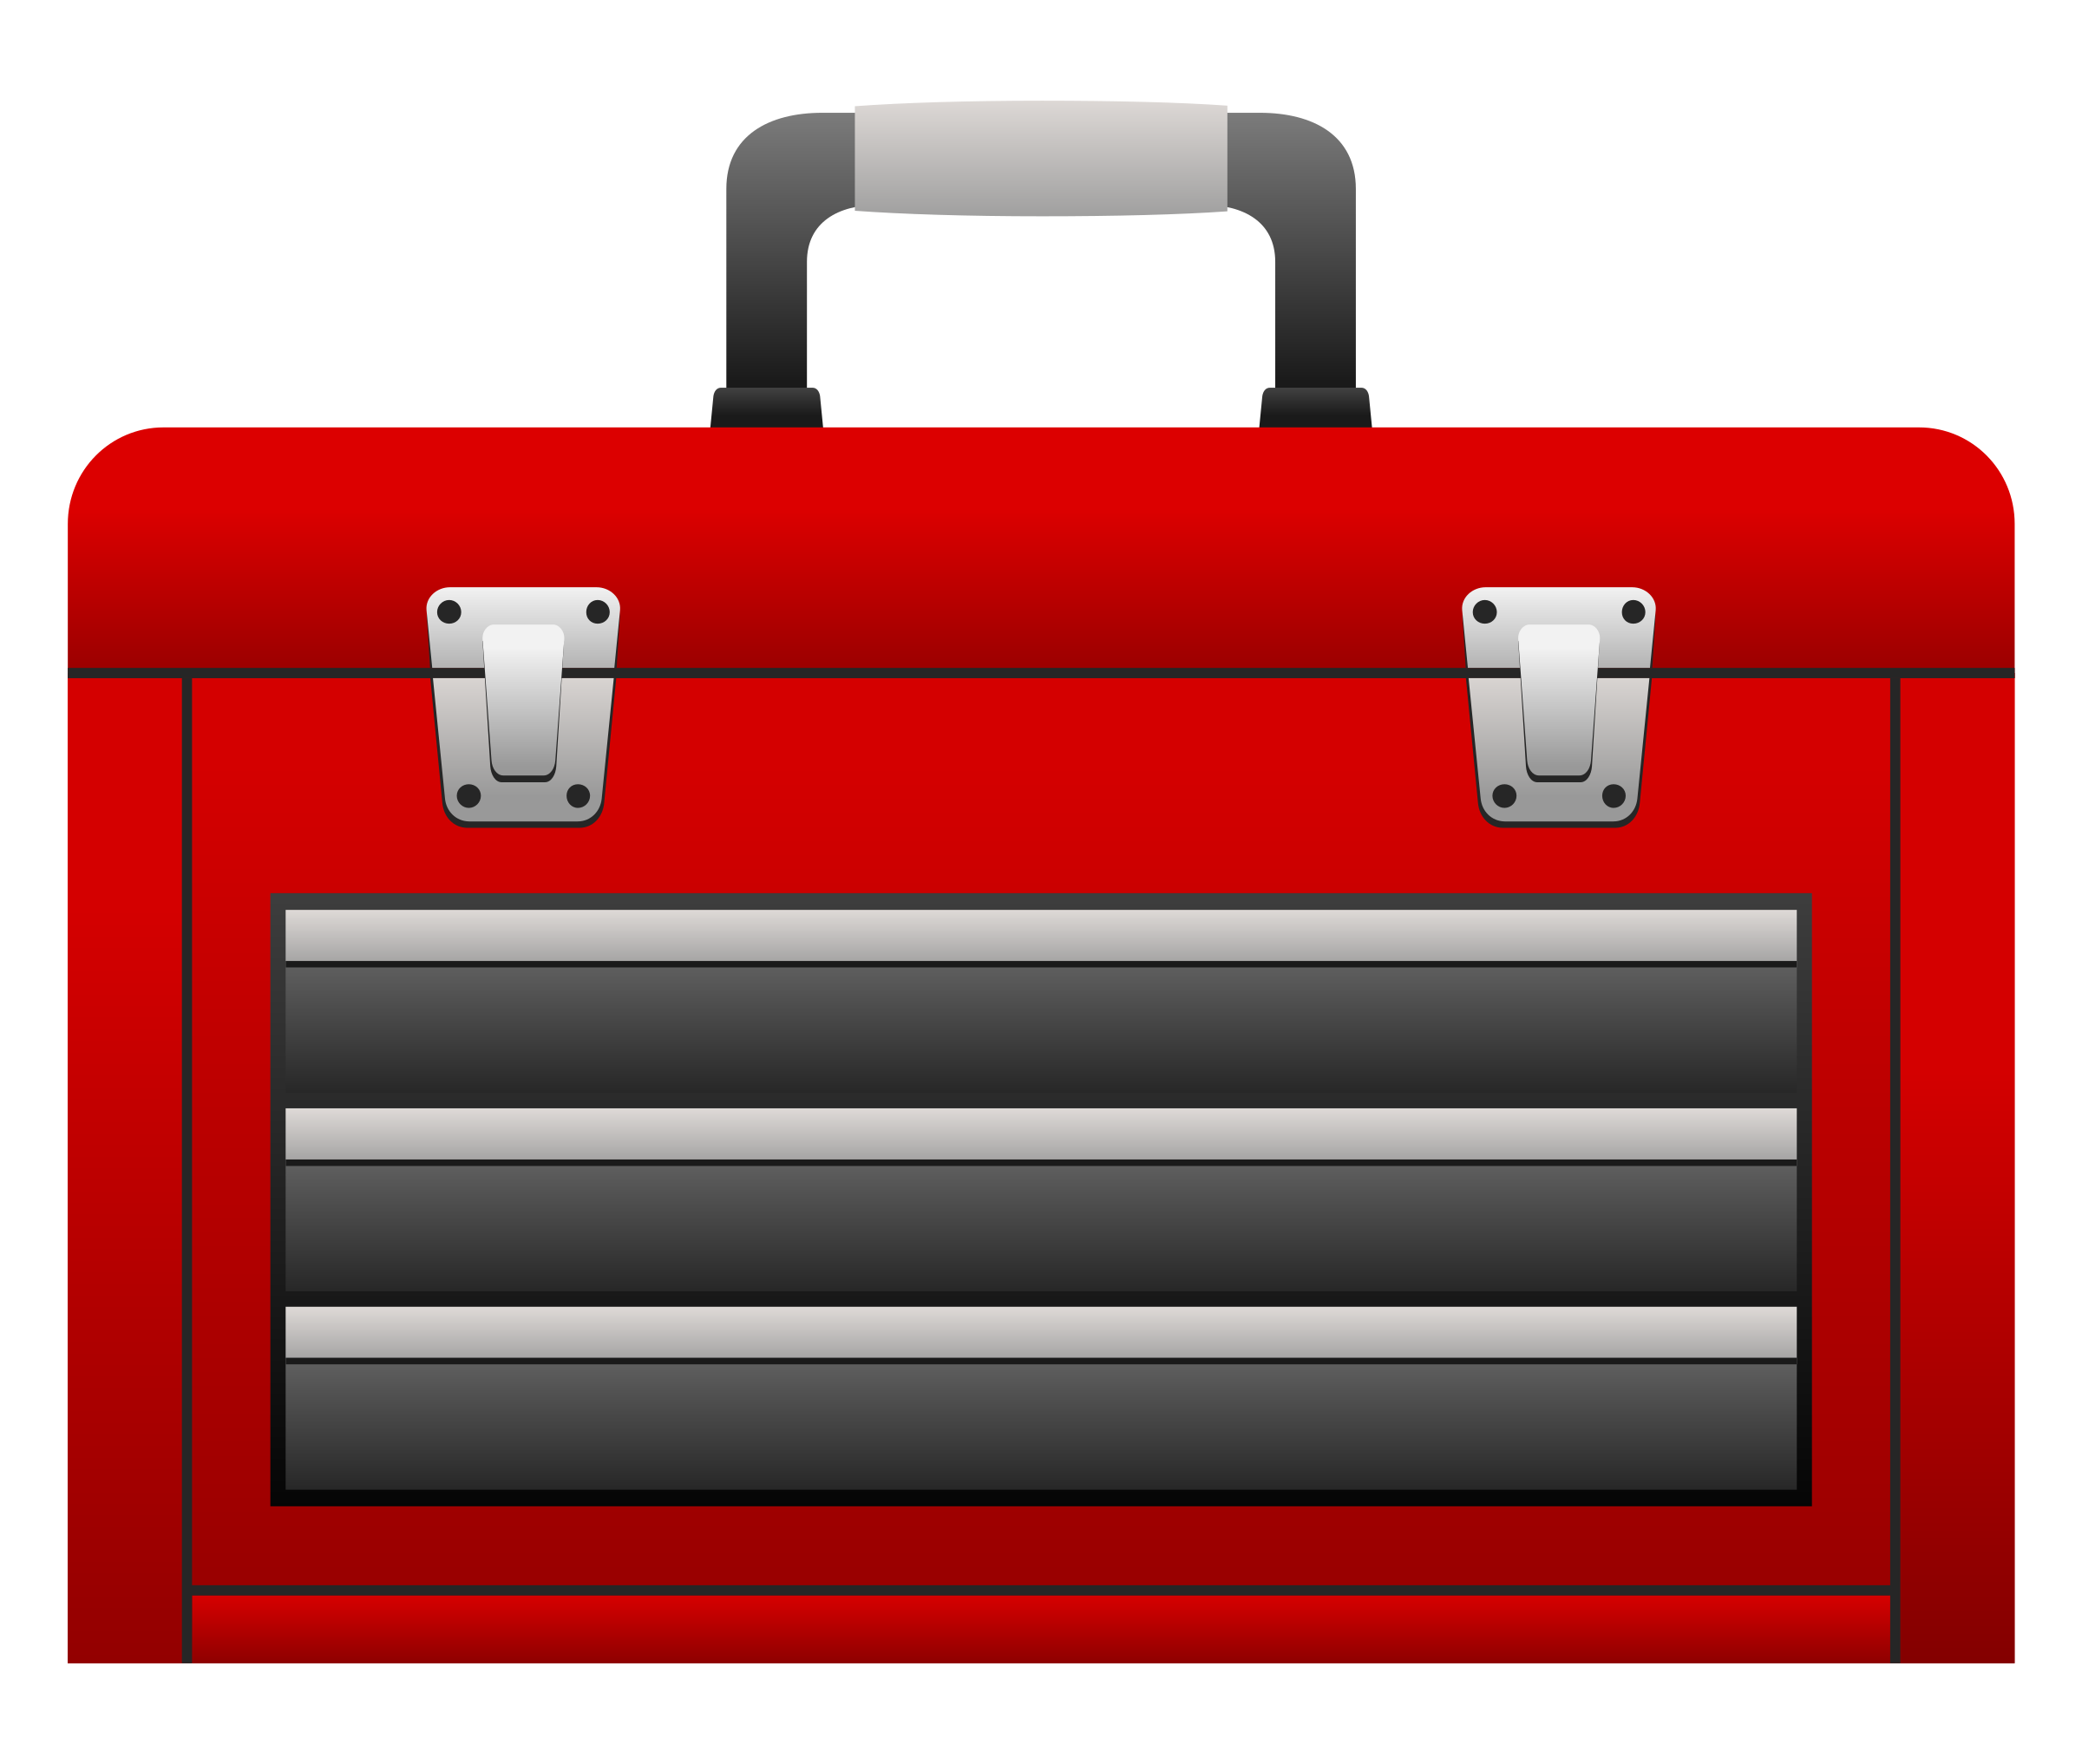 Toolbox clipart, Picture #27106 toolbox clipart